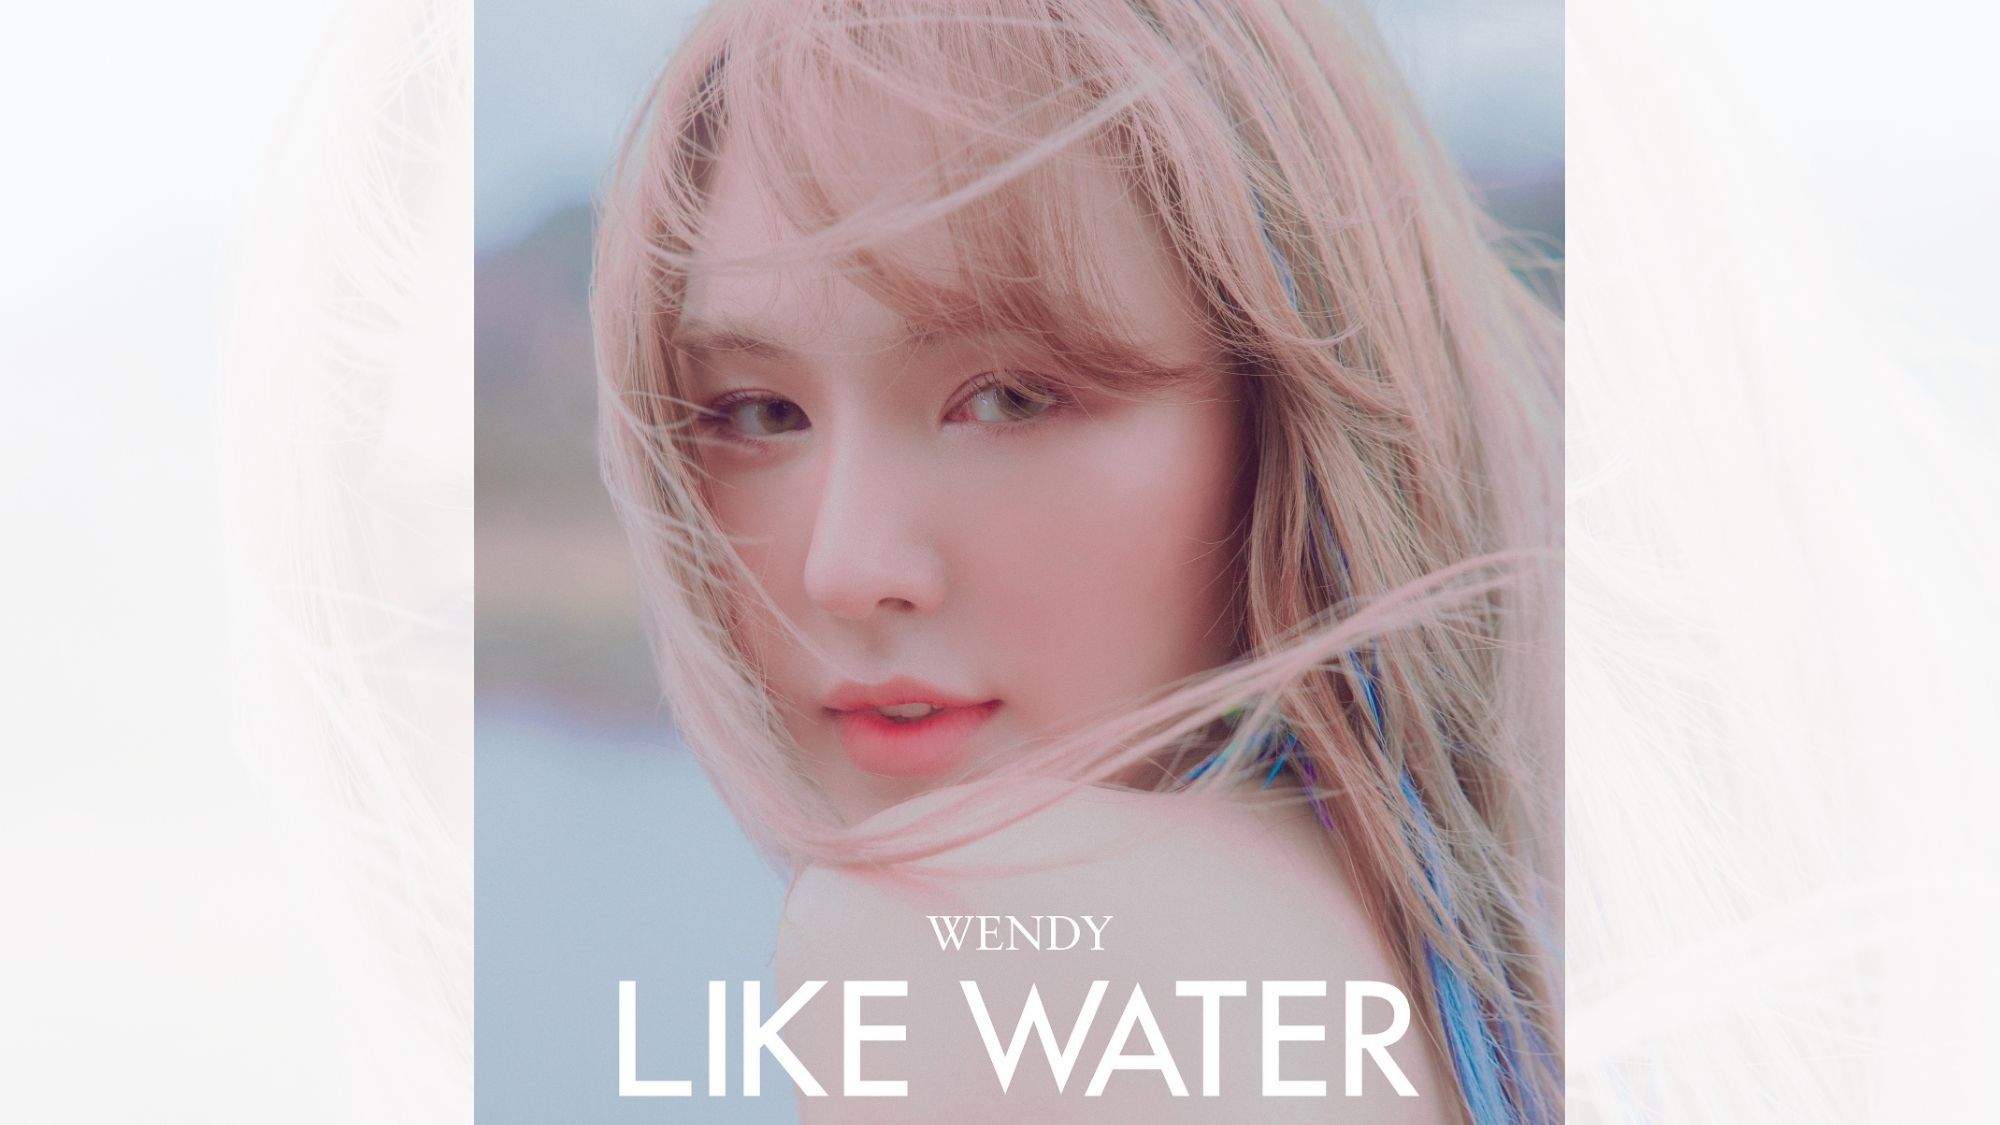 Wendy of Red Velvet finally debuts her solo album ‘Like Water’